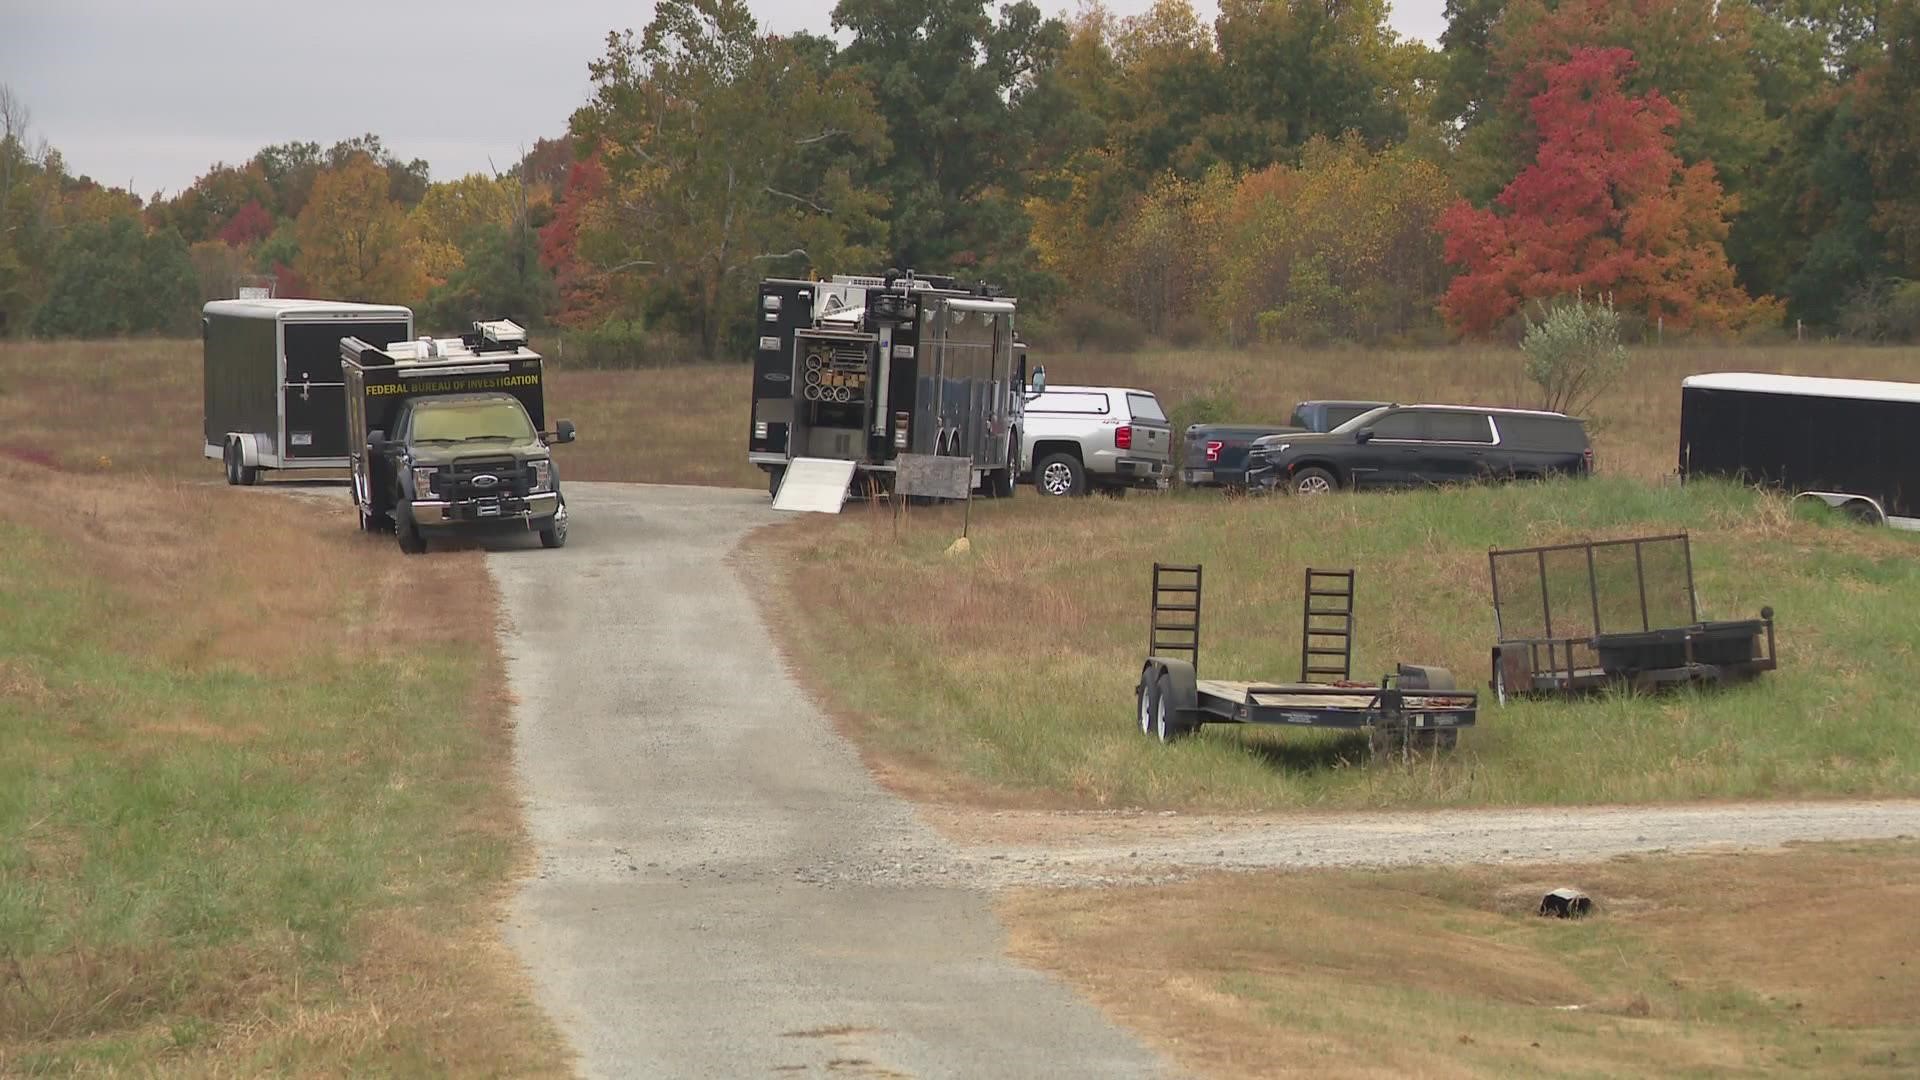 According to the FBI, agents did not leave the property unattended overnight and will keep the scene secured until the search is over.